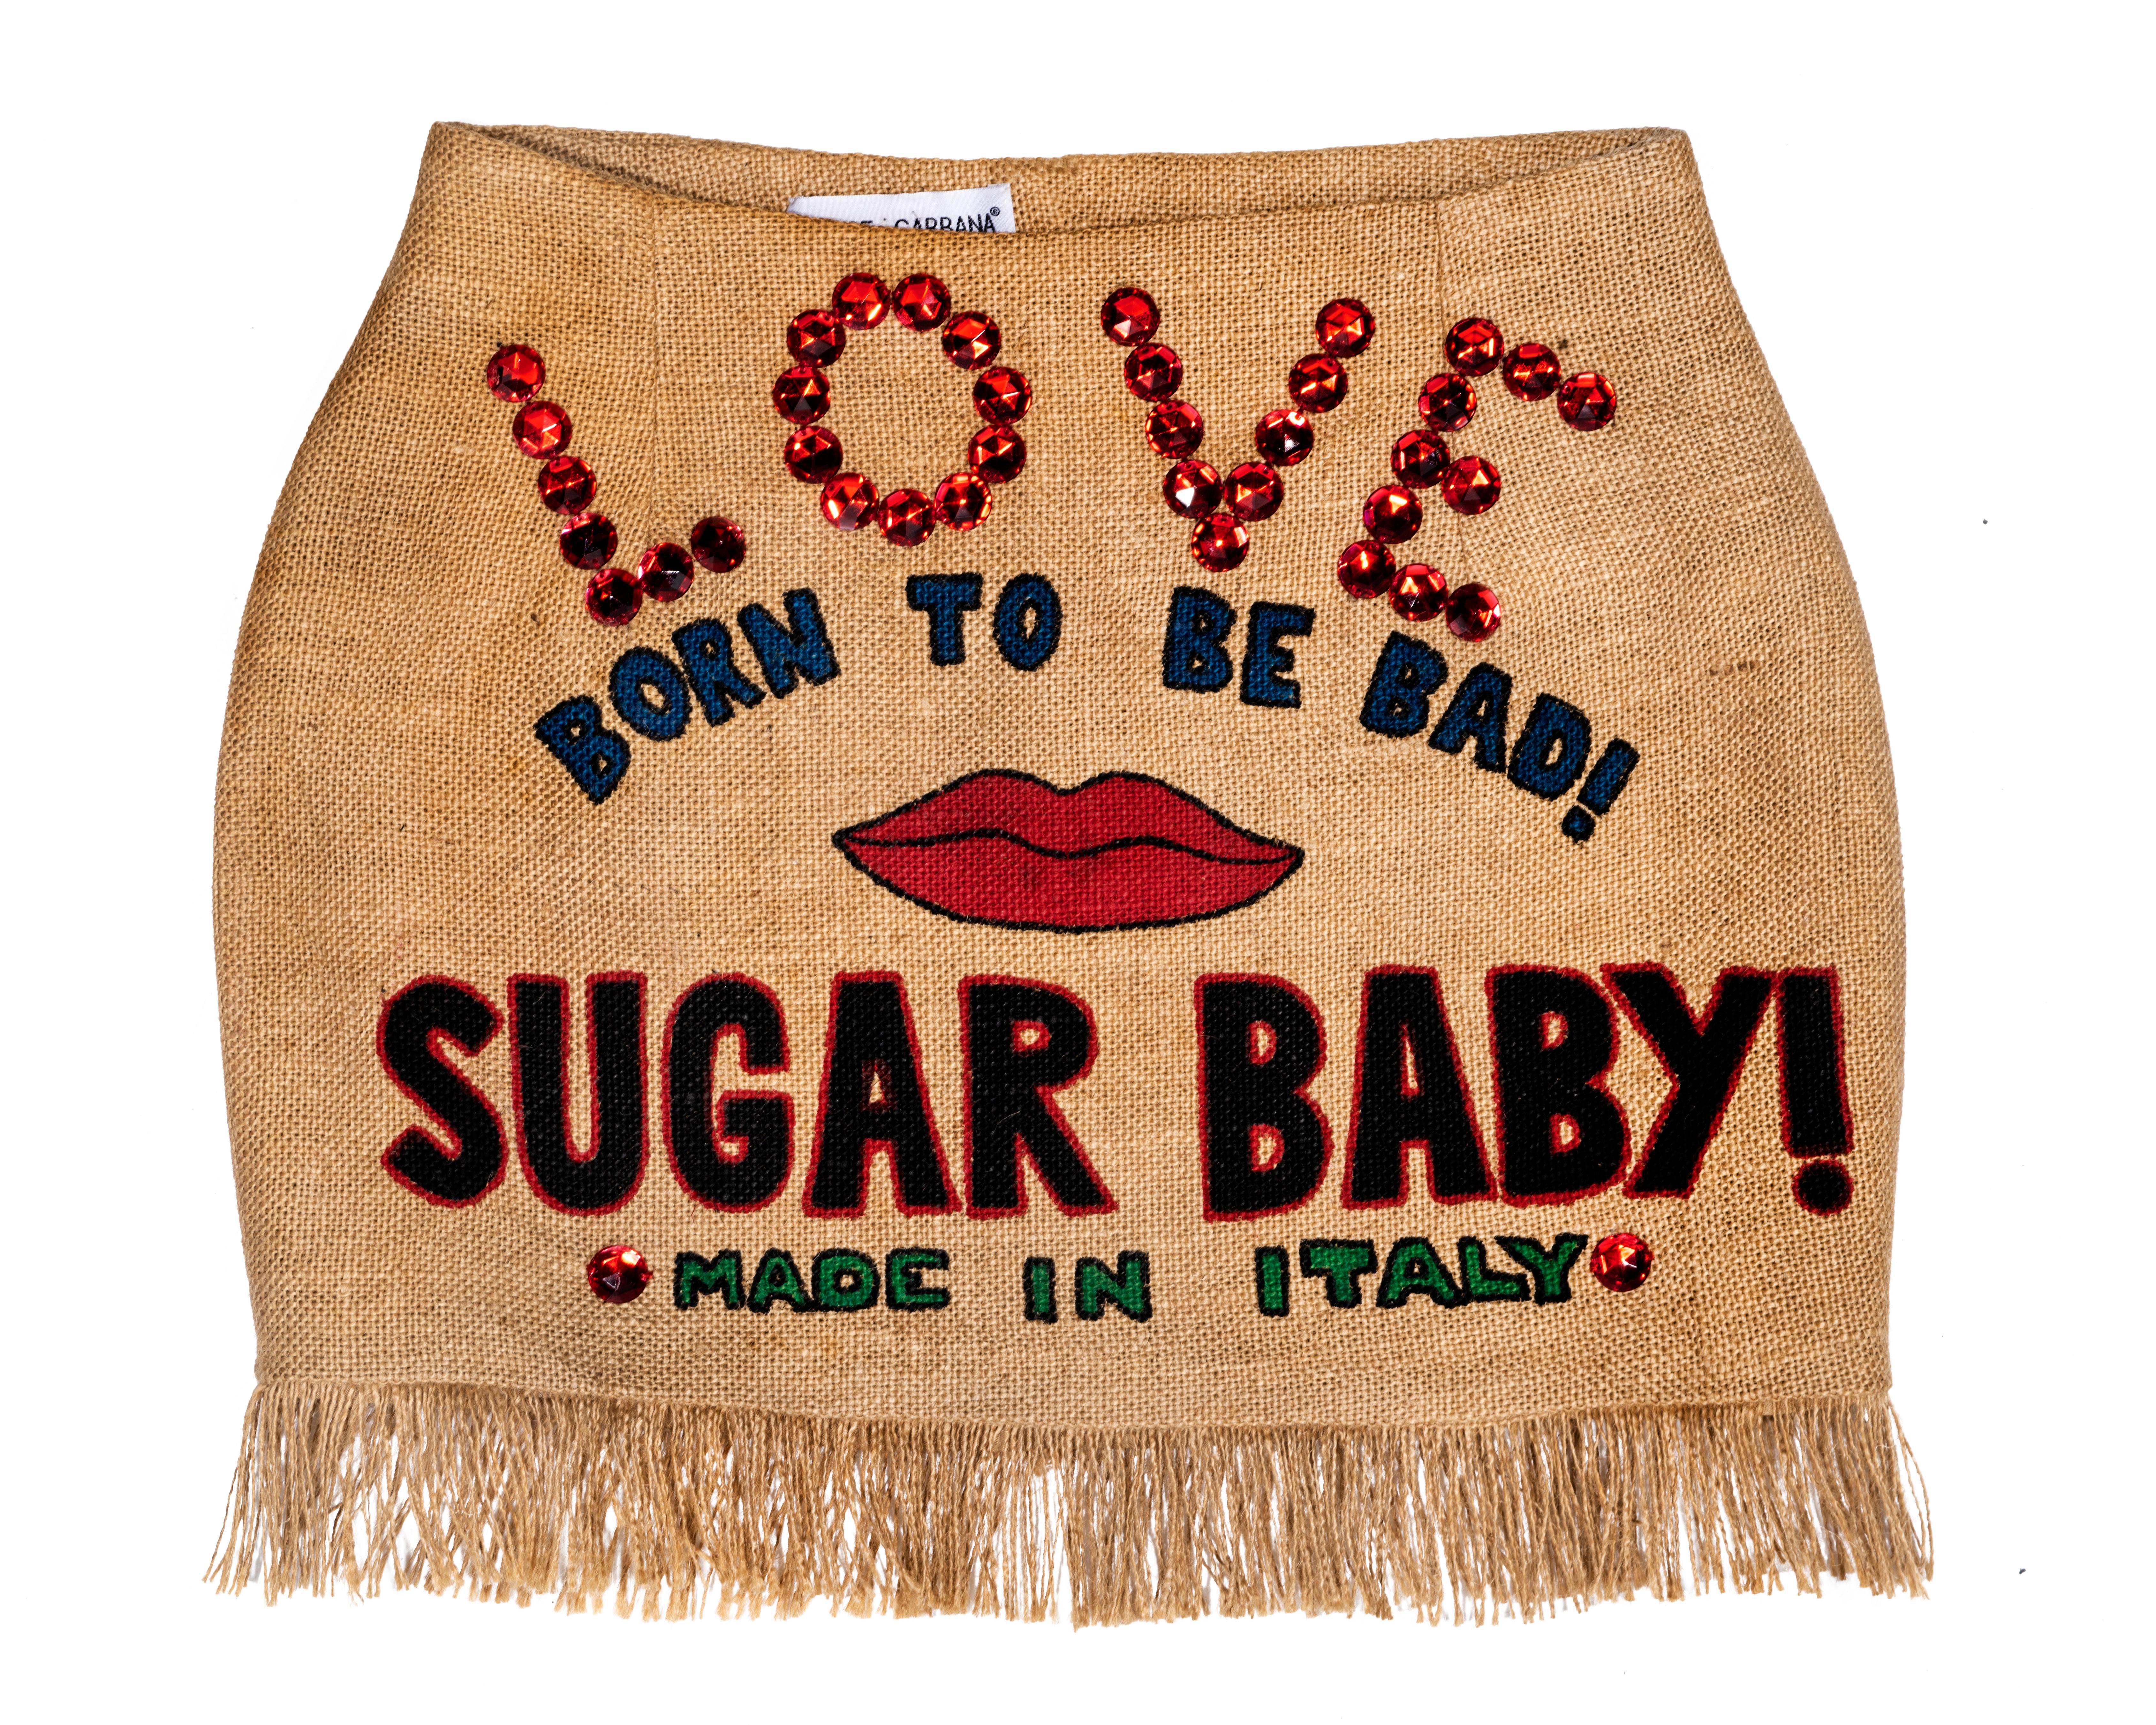 ▪ Iconic Dolce & Gabbana jute mini skirt 
▪ Hand painted designs ('BORN TO BE BAD!', red lips, 'SUGAR BABY!', and 'MADE IN ITALY')
▪ Large red gems ('LOVE')
▪ Fringe hemline 
▪ W 27